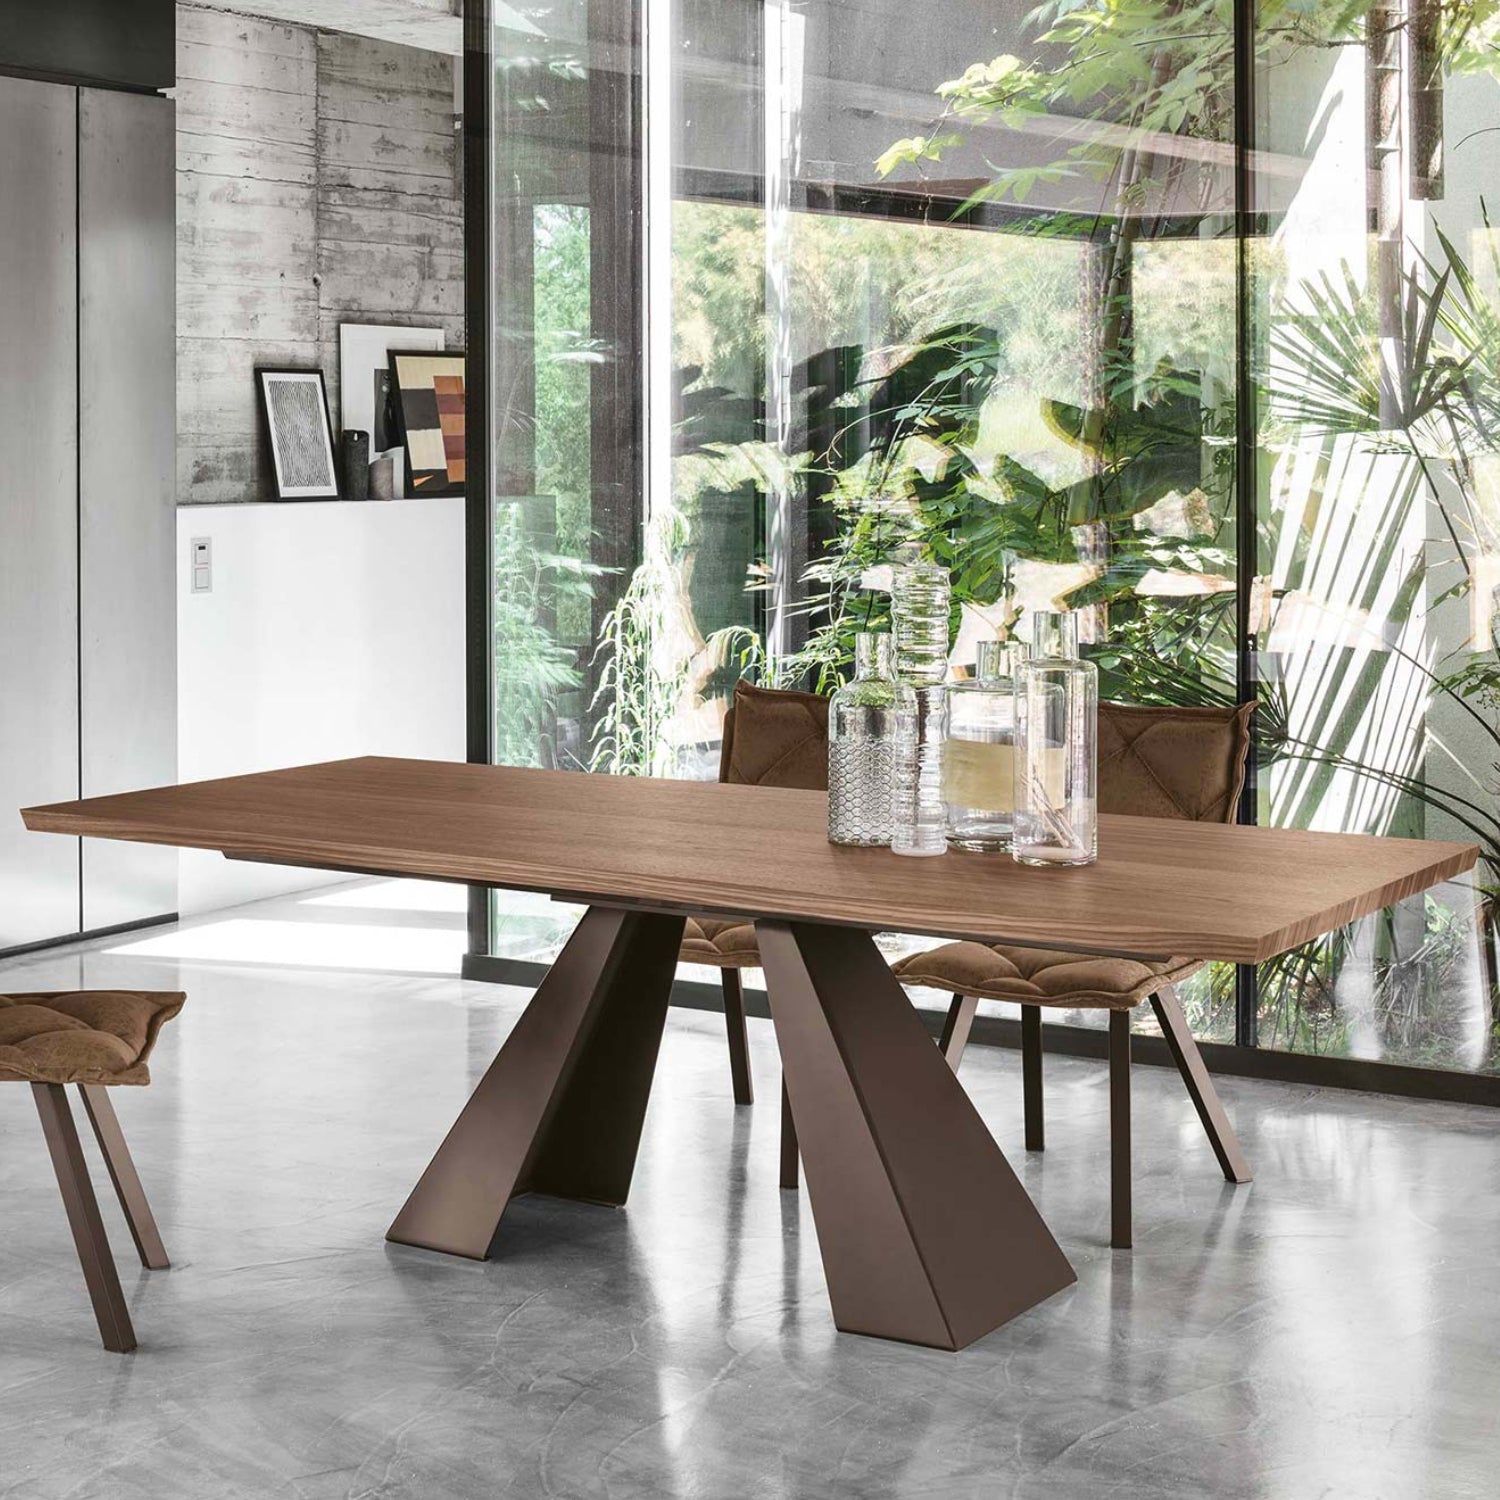 Taurus Rectangular Shaped Fixed Table by Target Point